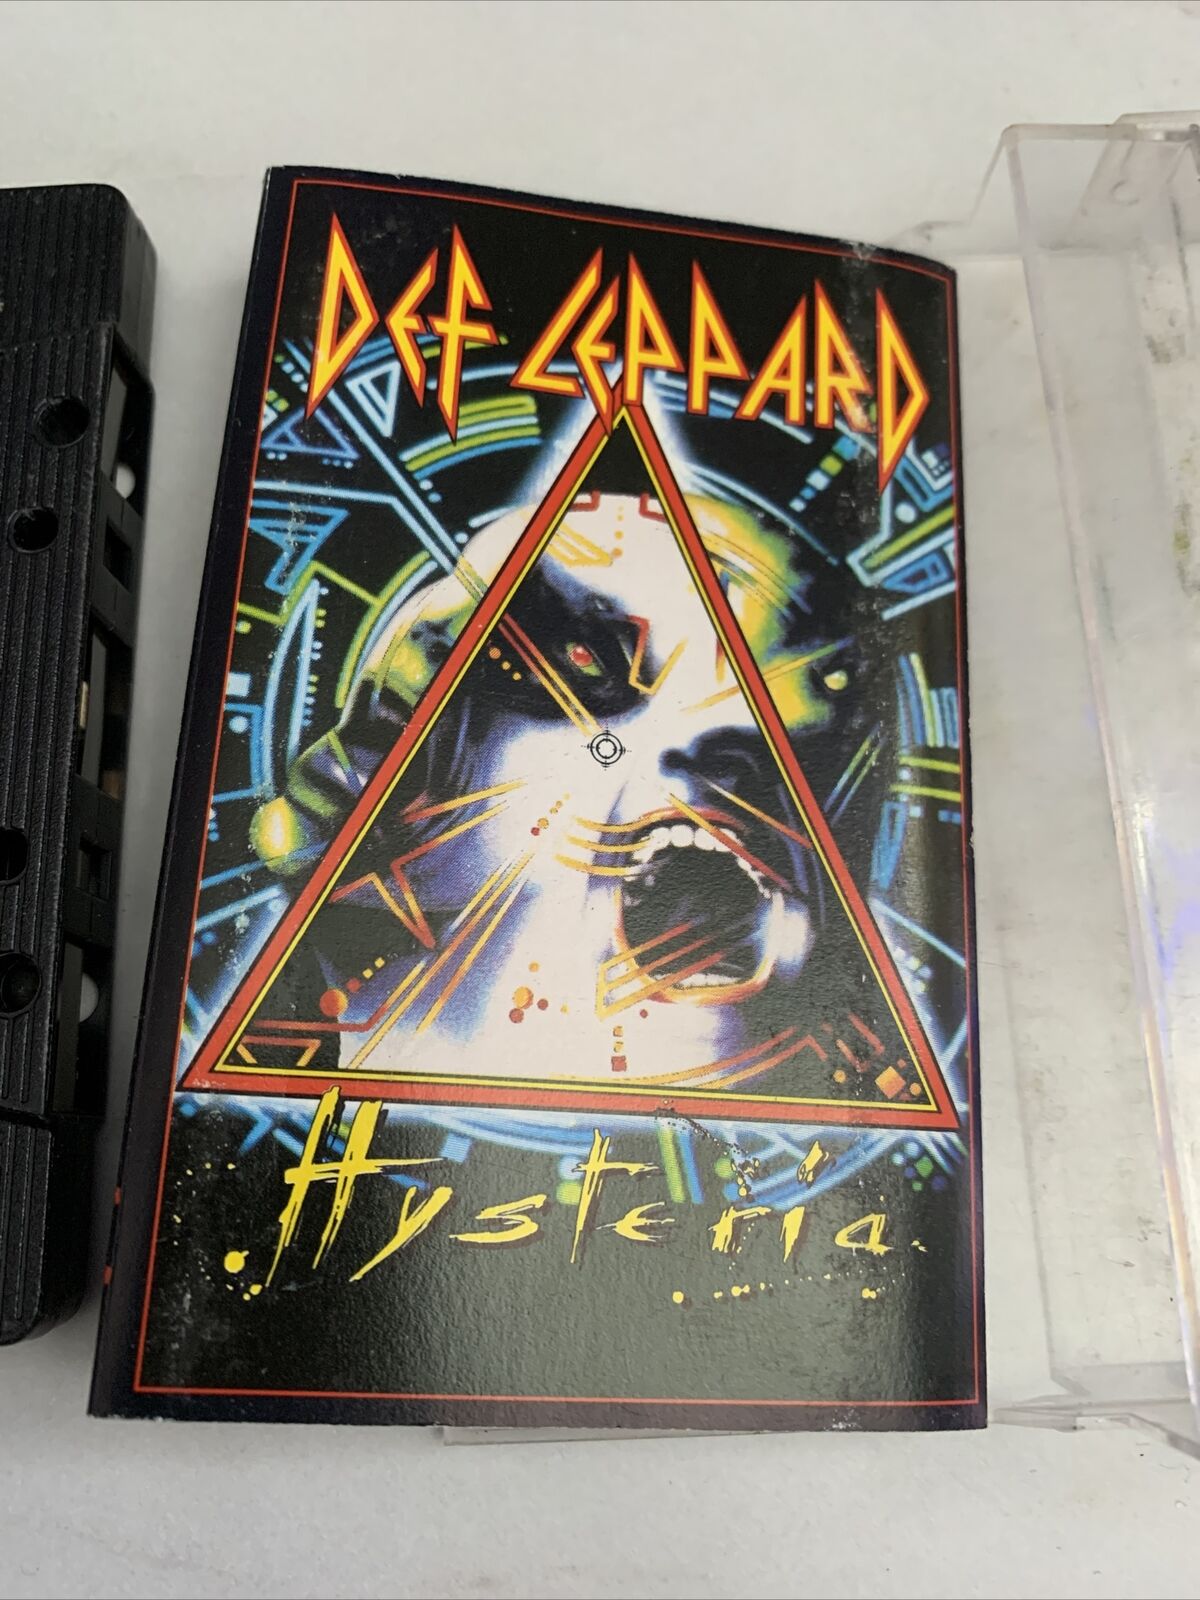 Hysteria by Def Leppard (Cassette)